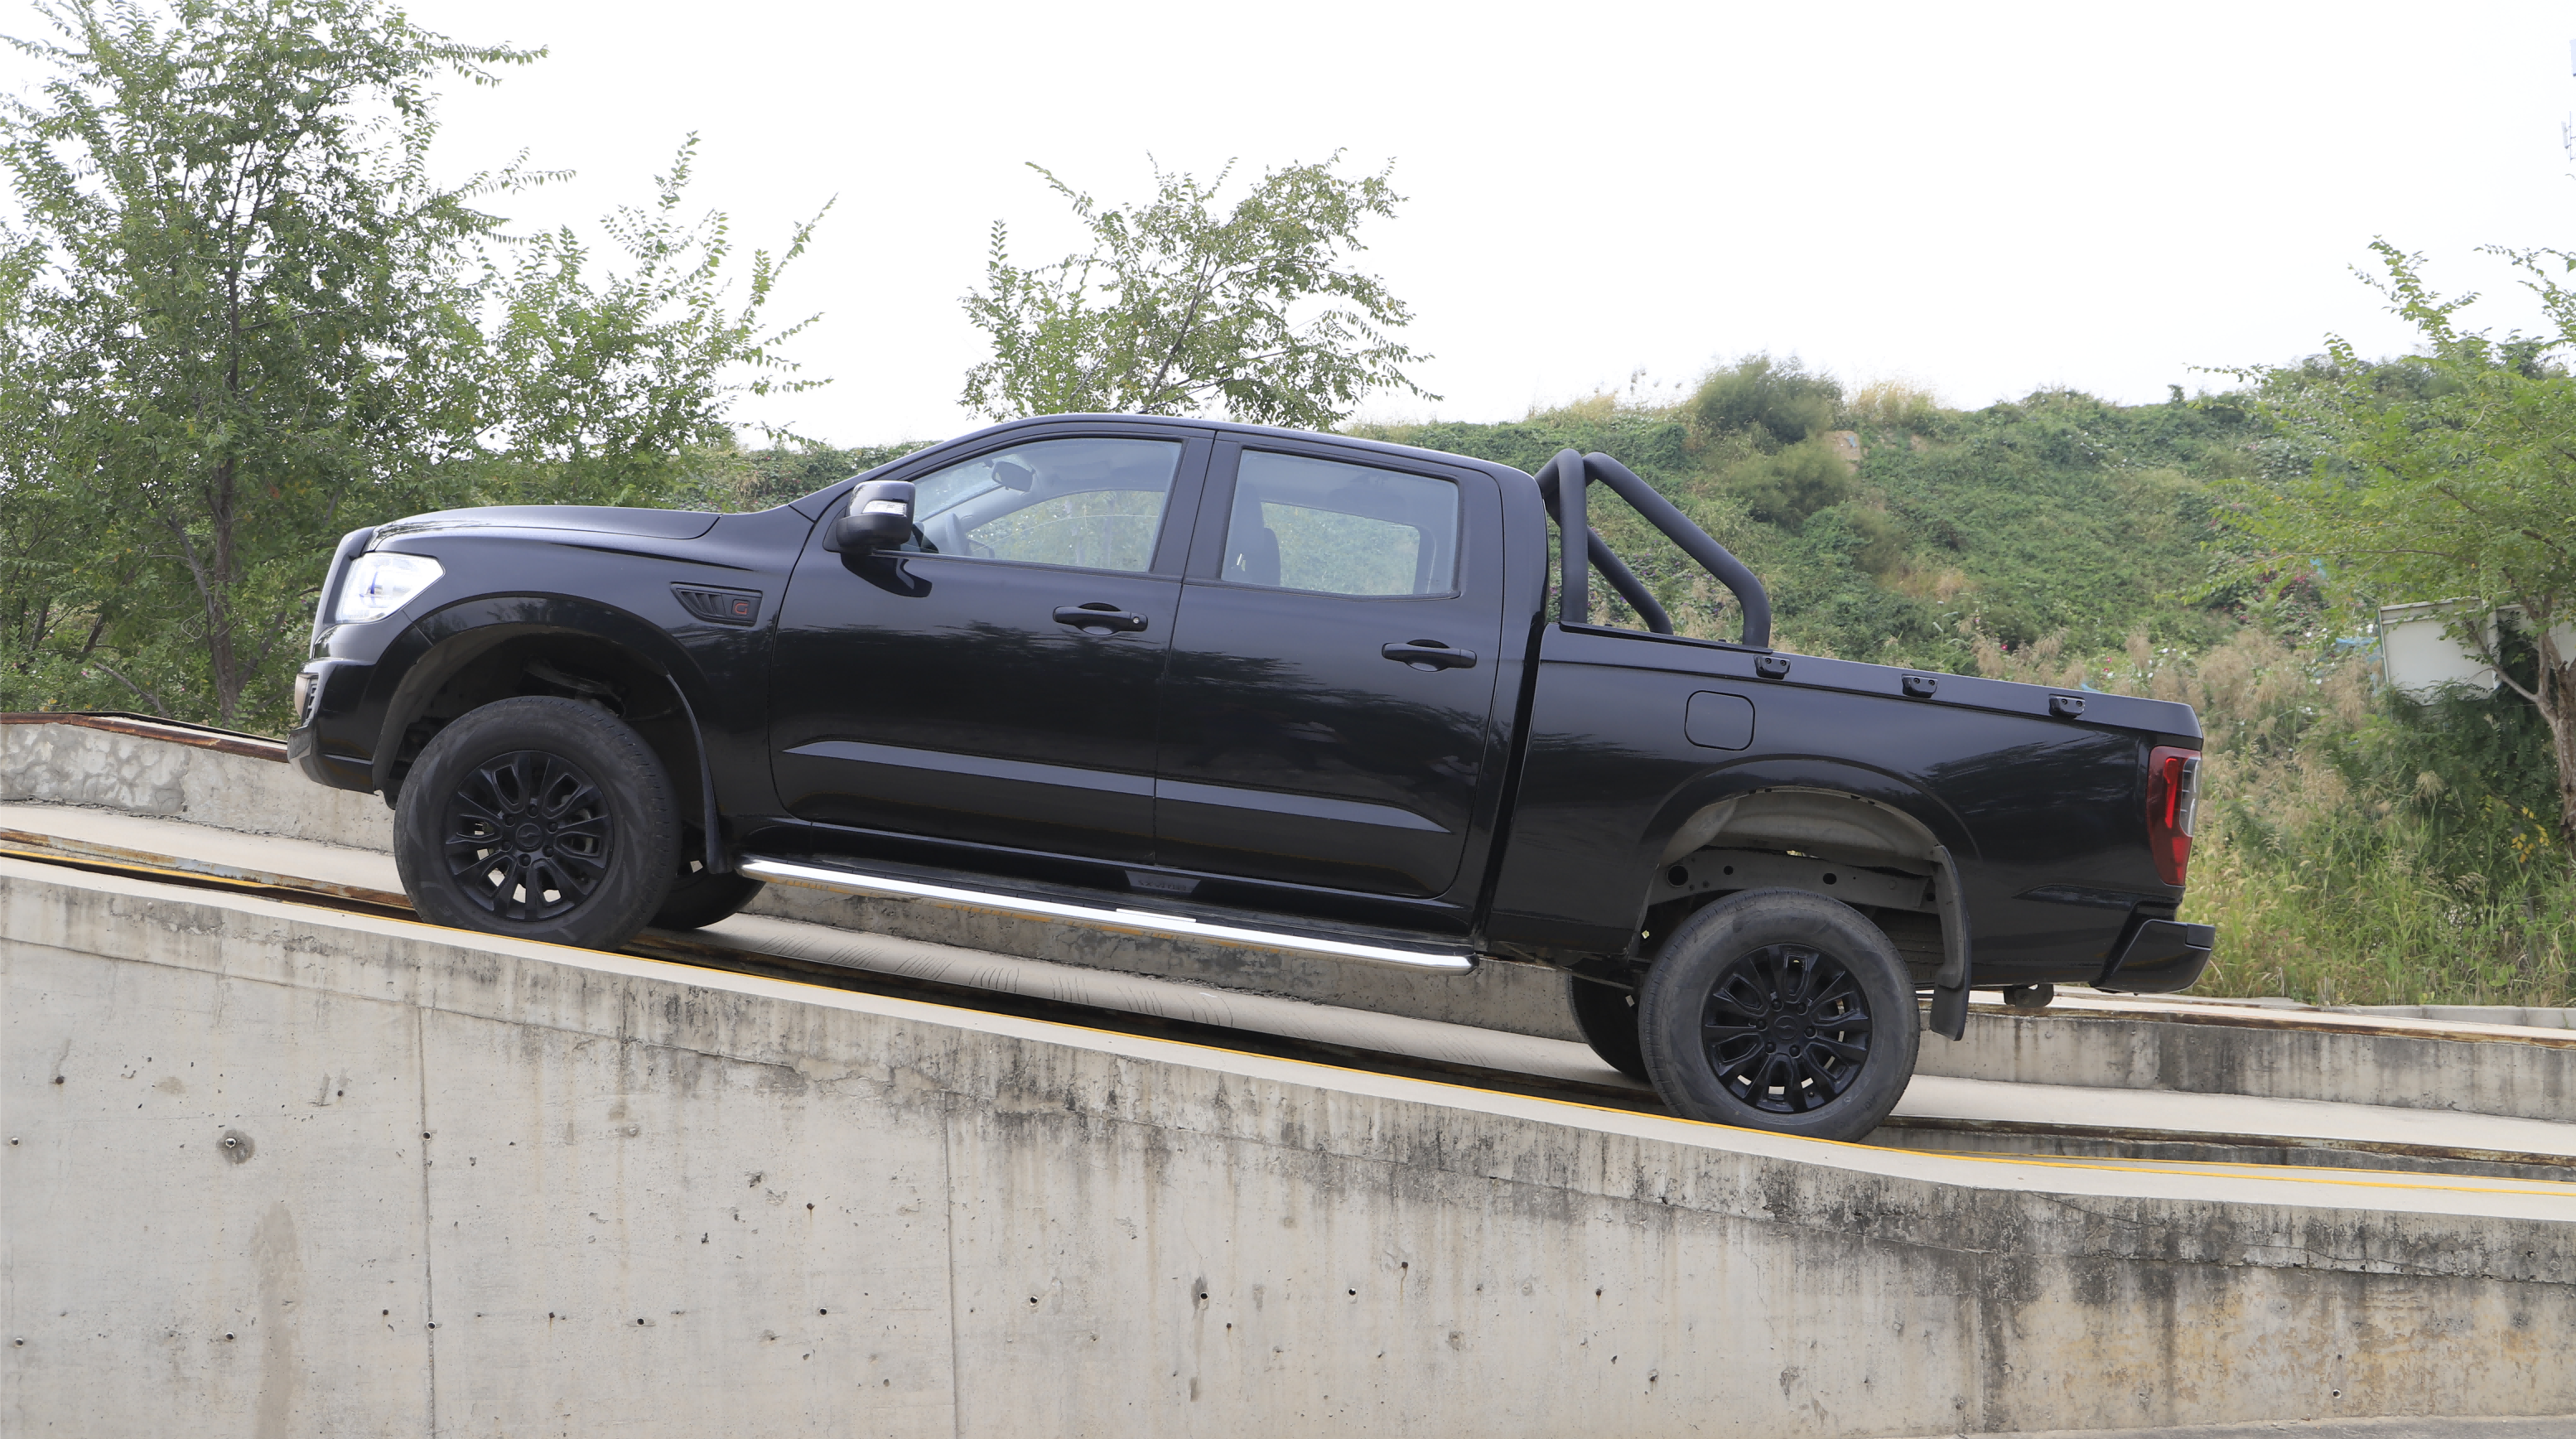 ZXAUTO Terralord is a very competitive pickup truck